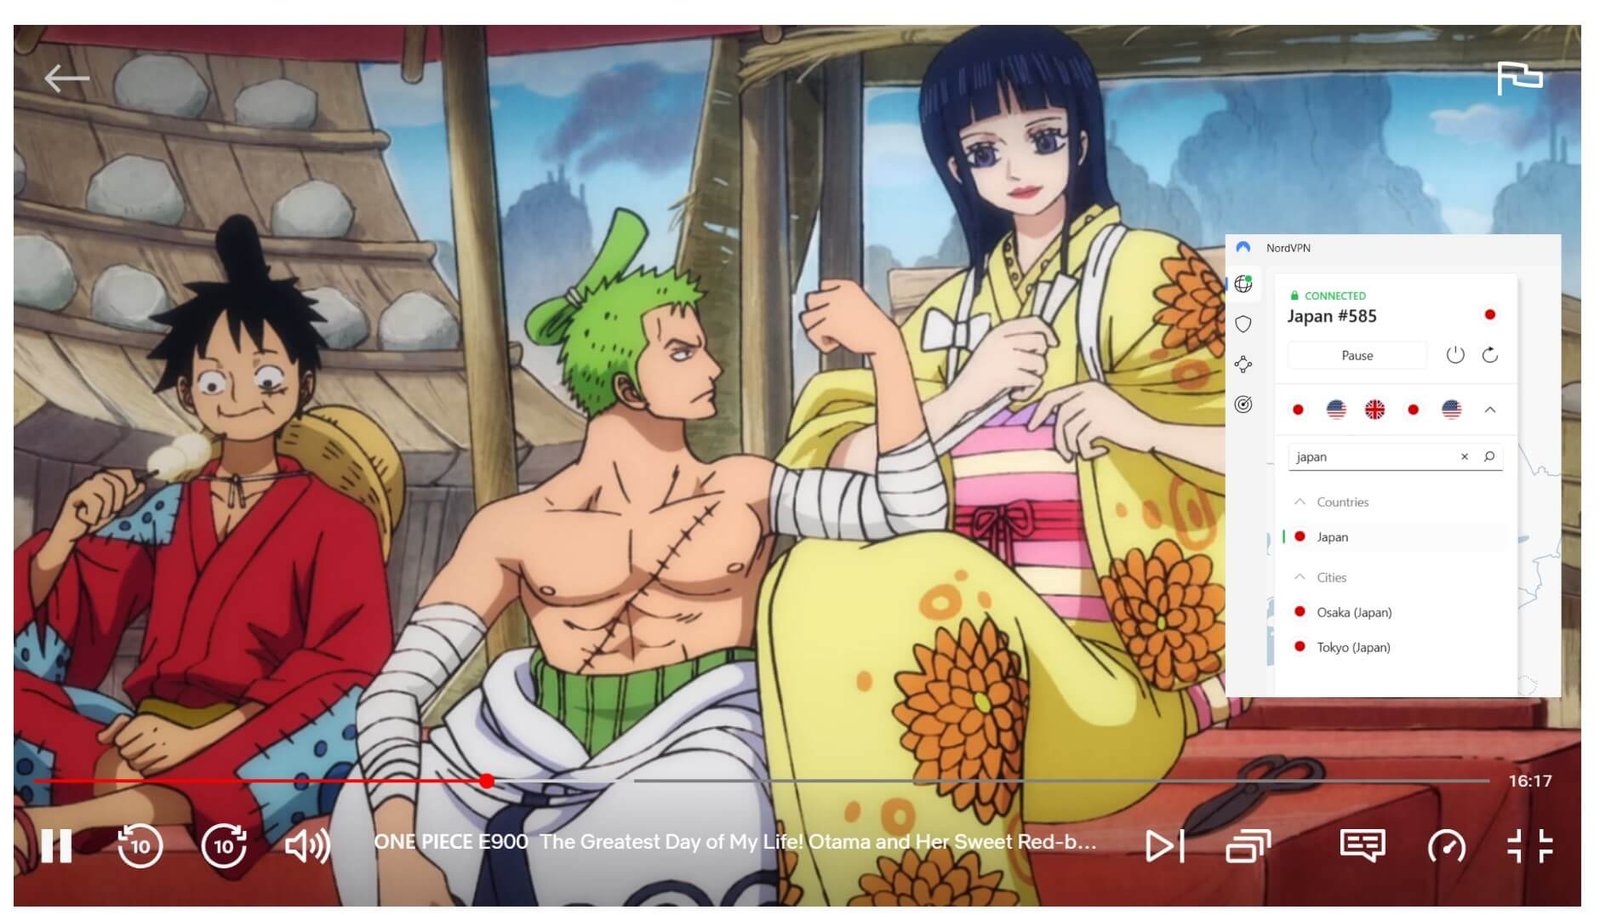 How to Watch One Piece on Netflix